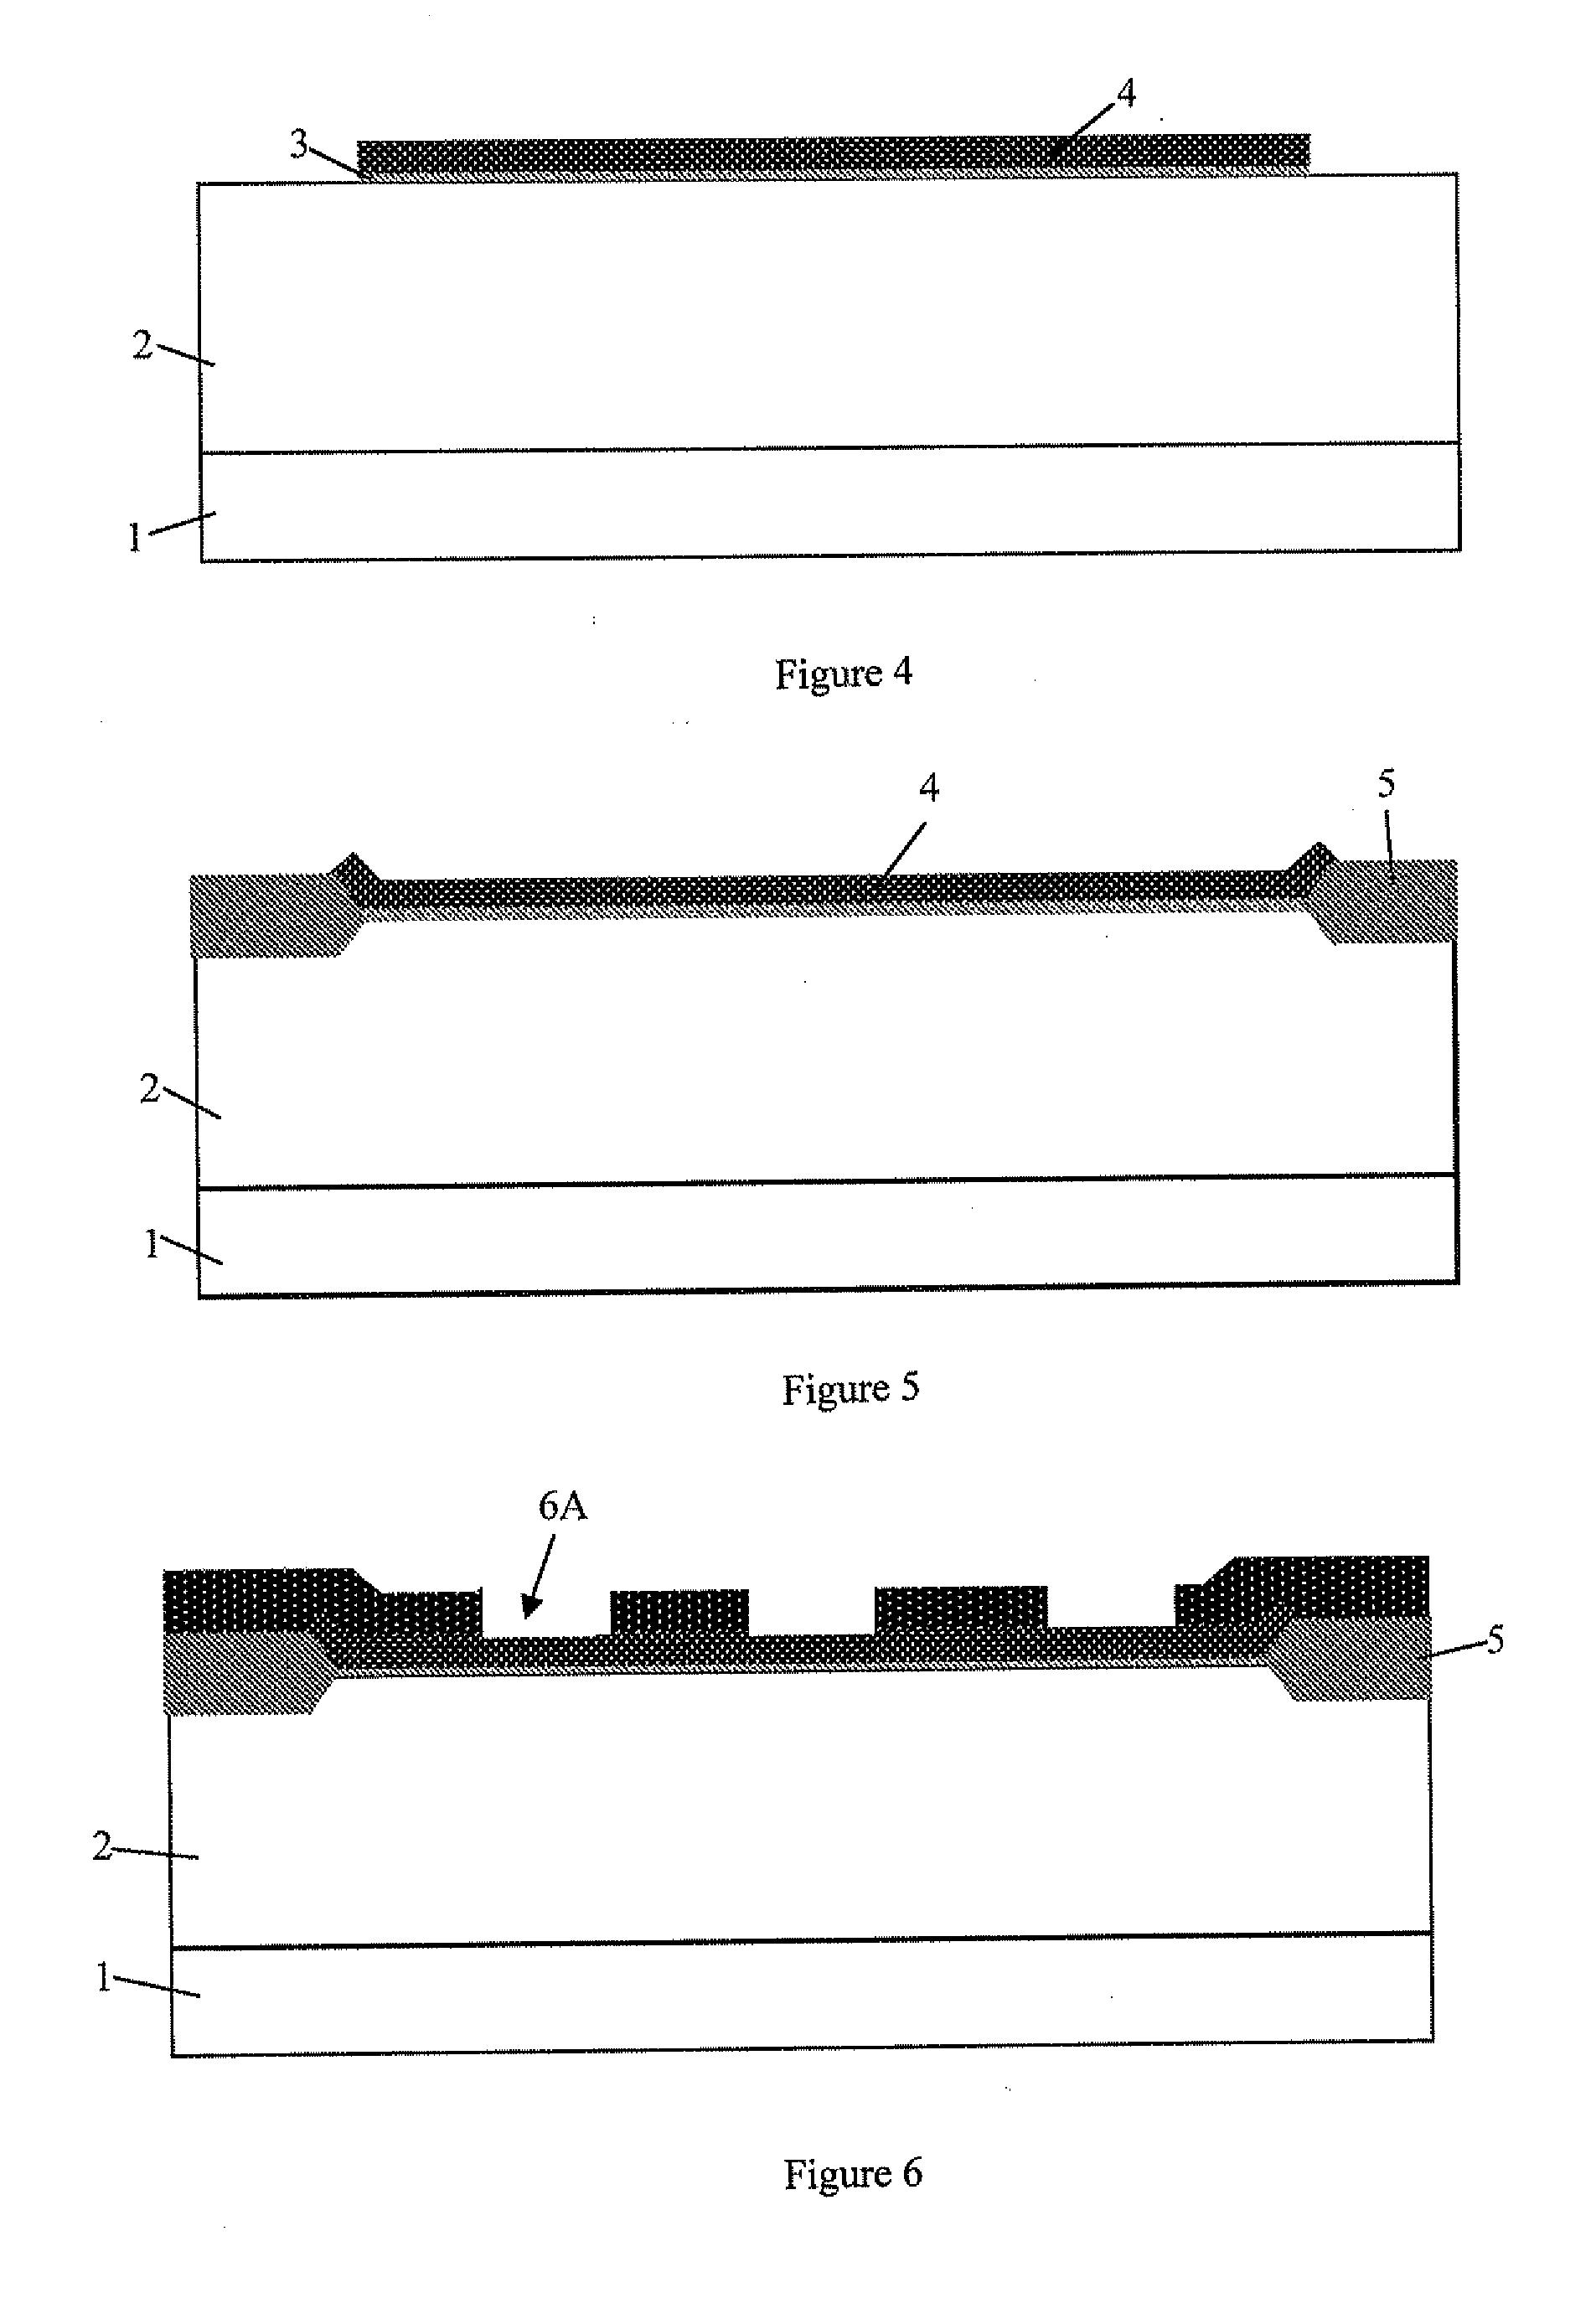 Trench mosfet with trench contact holes and method for fabricating the same